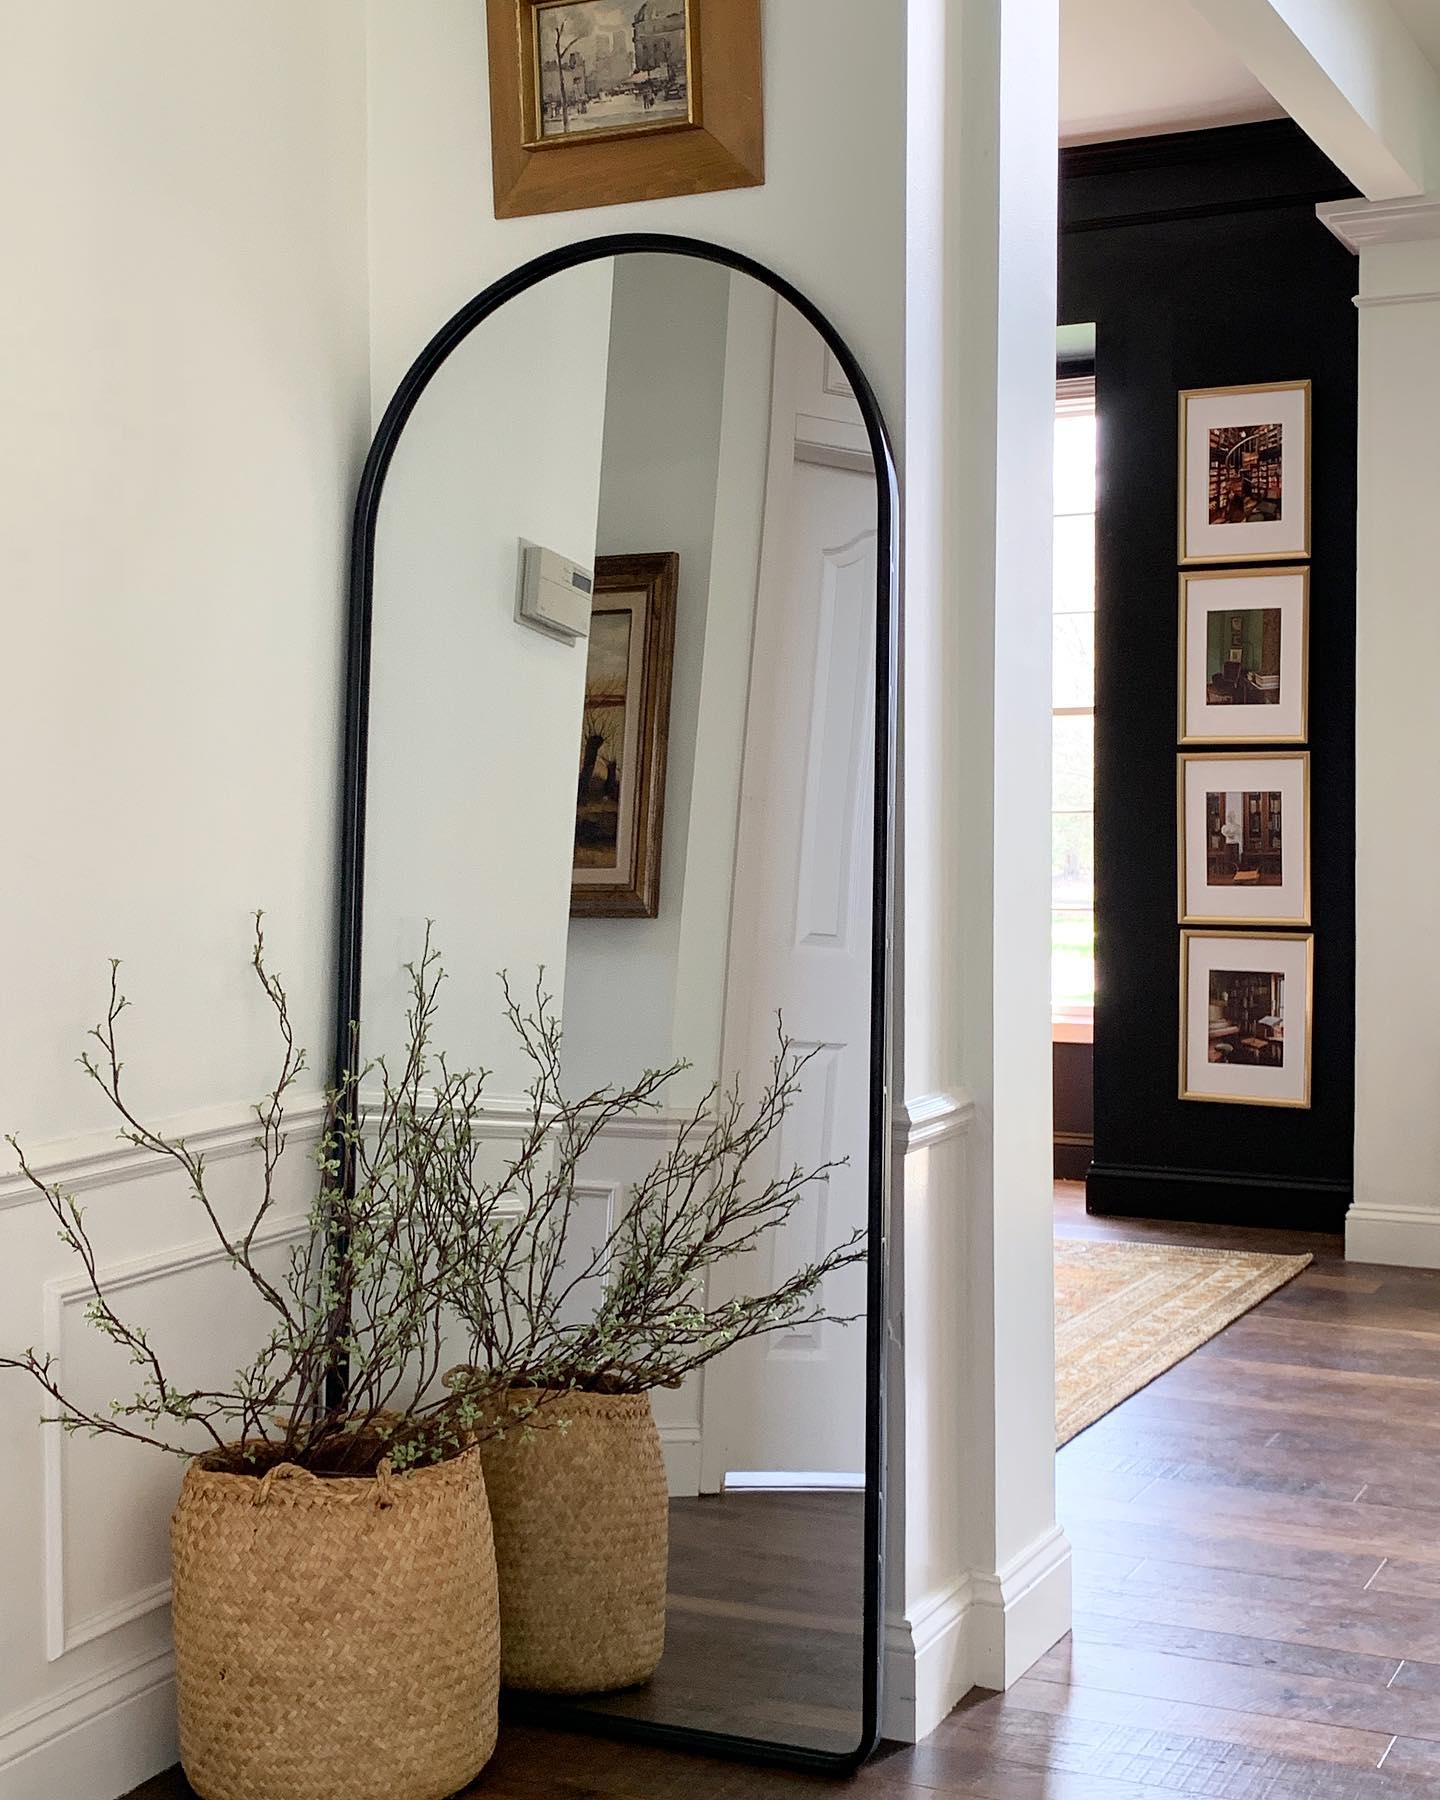 Refreshed a little corner in our entry with new pieces from @allmodern! Love the scale of this arched mirror, and the basket actually comes as a set of two. I’m using the larger one in our family room to store blankets, and here, the smaller one is perfect for some stems.👏🏼 Take advantage of their fast and free shipping! Learn more sbout @allmodern’s product via the @shop.ltk app. I’ve linked these items here➡️ https://liketk.it/3FqbK #ad #allmodernpartner #summerwithallmodern #liketkit